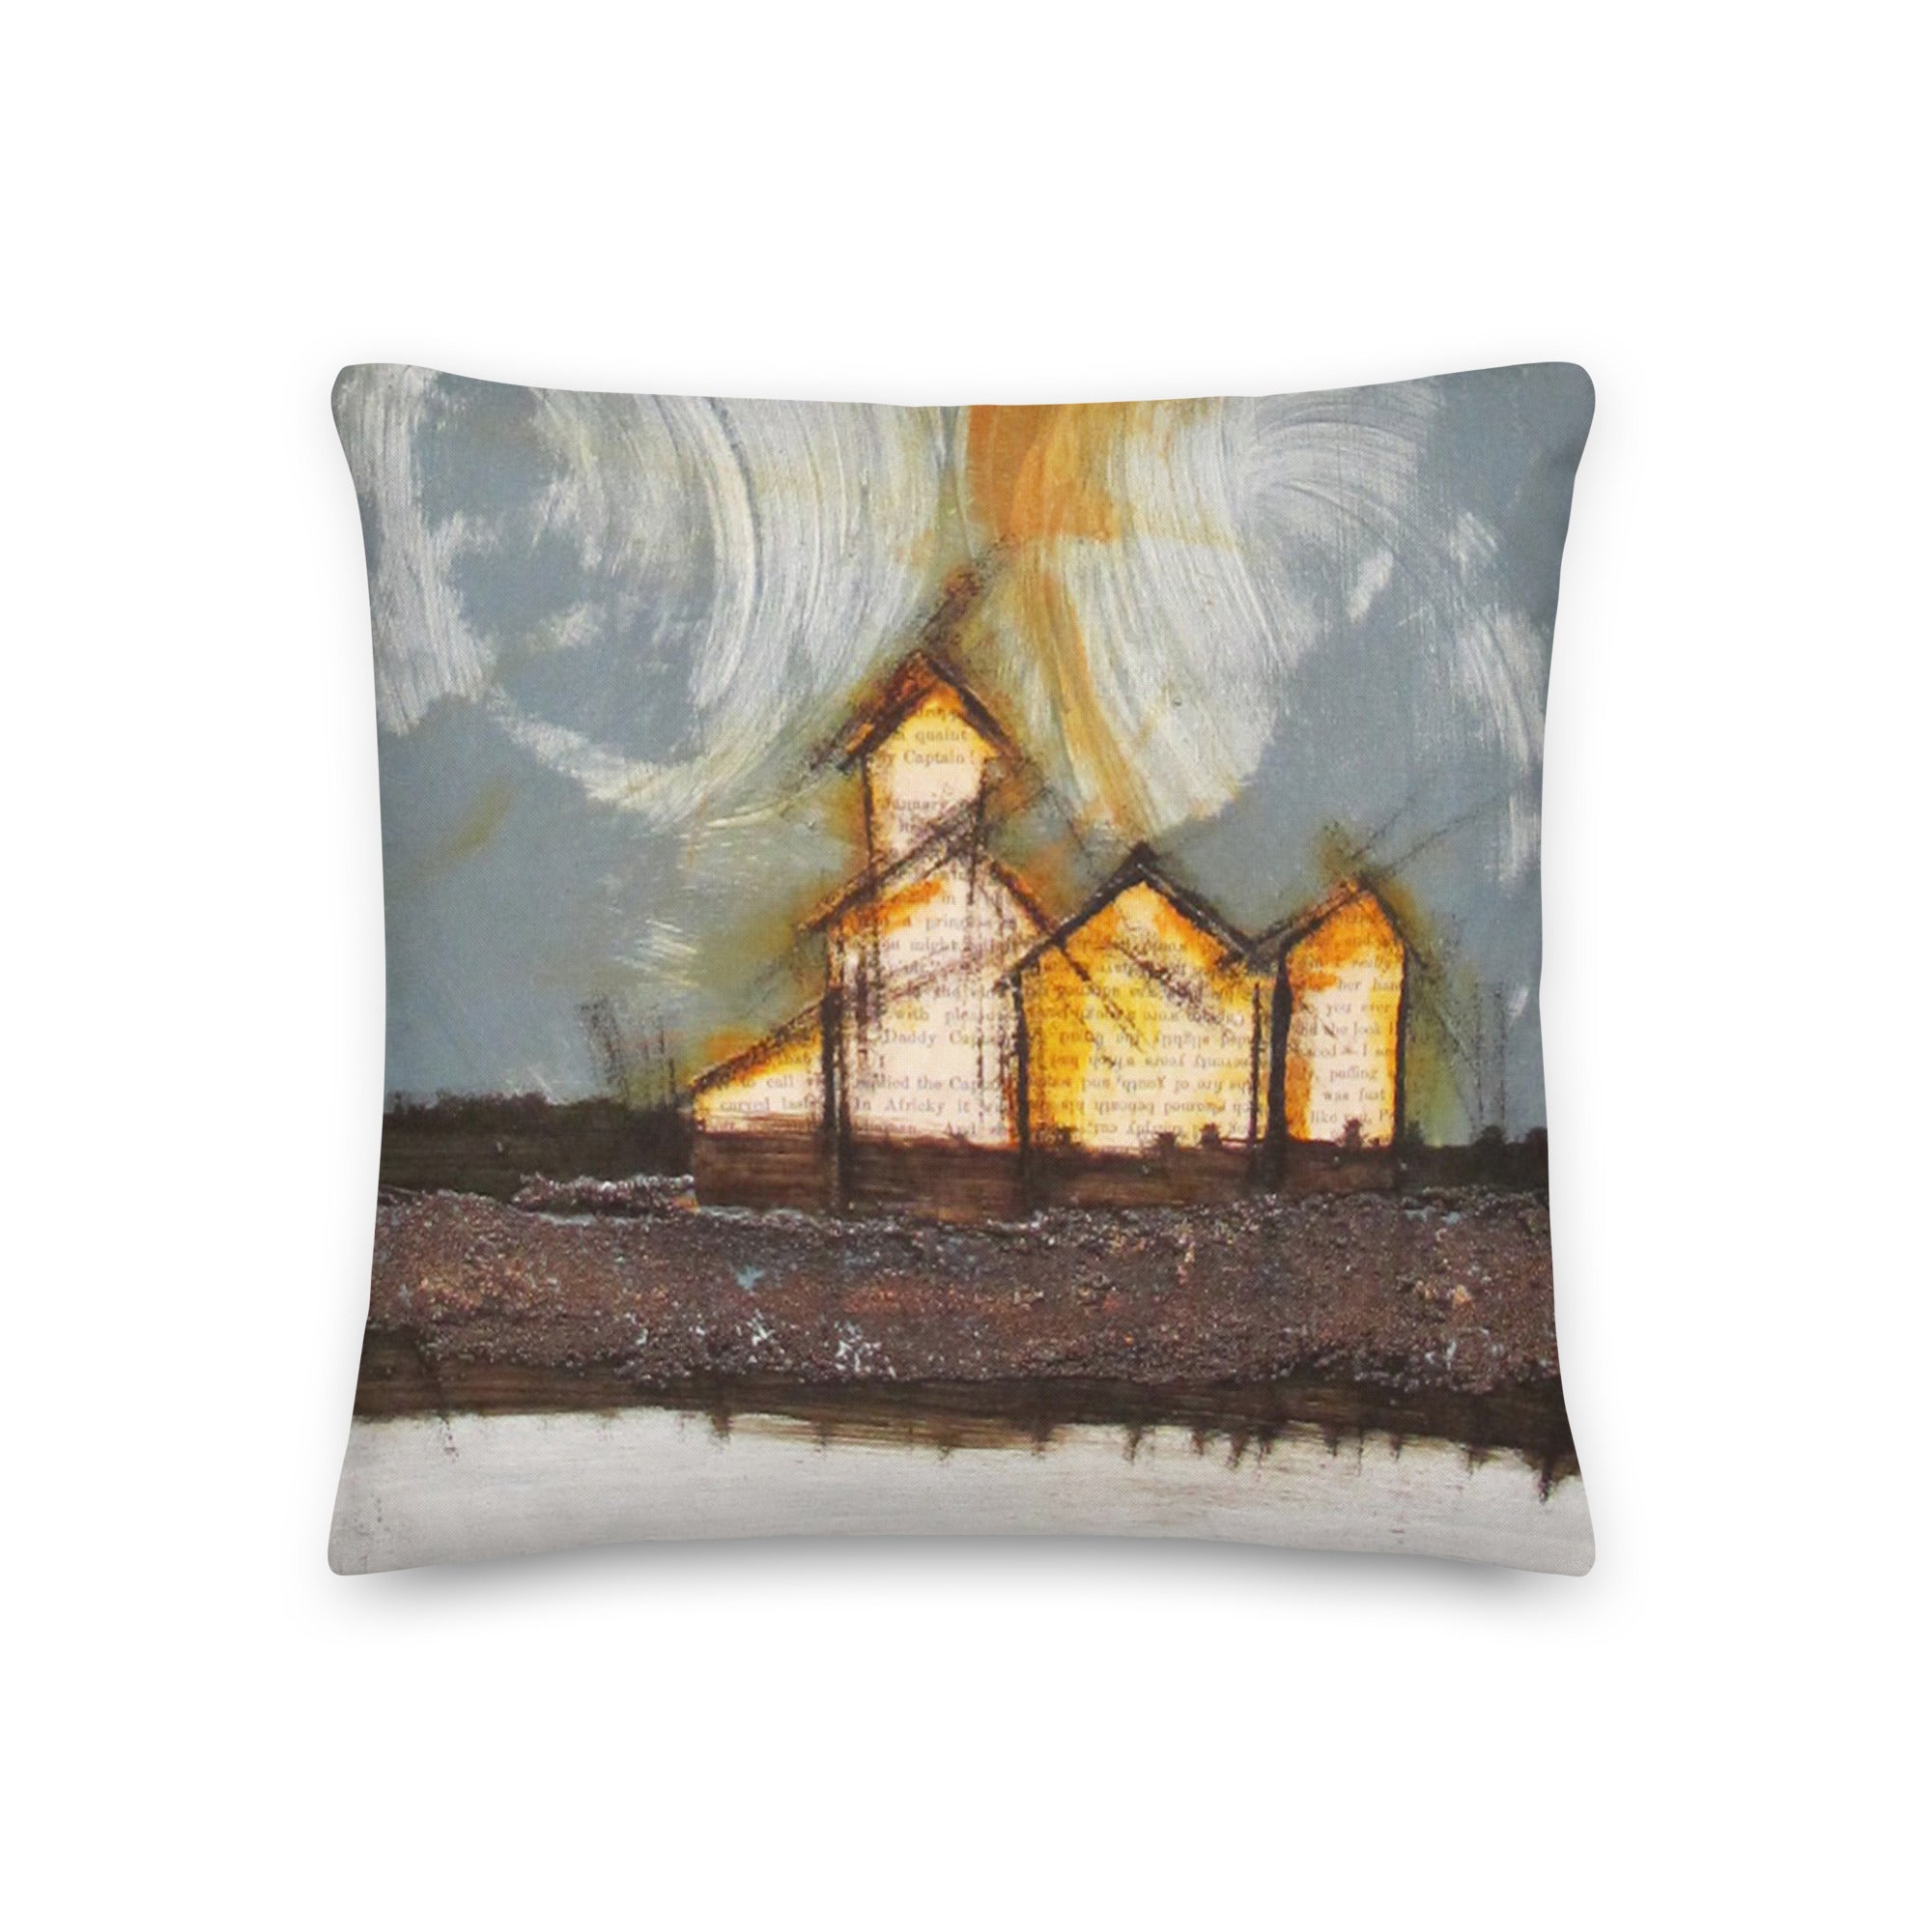 Beauty in the Sky Above I - Artful, Decorative Throw Pillow with blue skies above prairie landscape and elevators and grain sheds.  Original art on pillow.